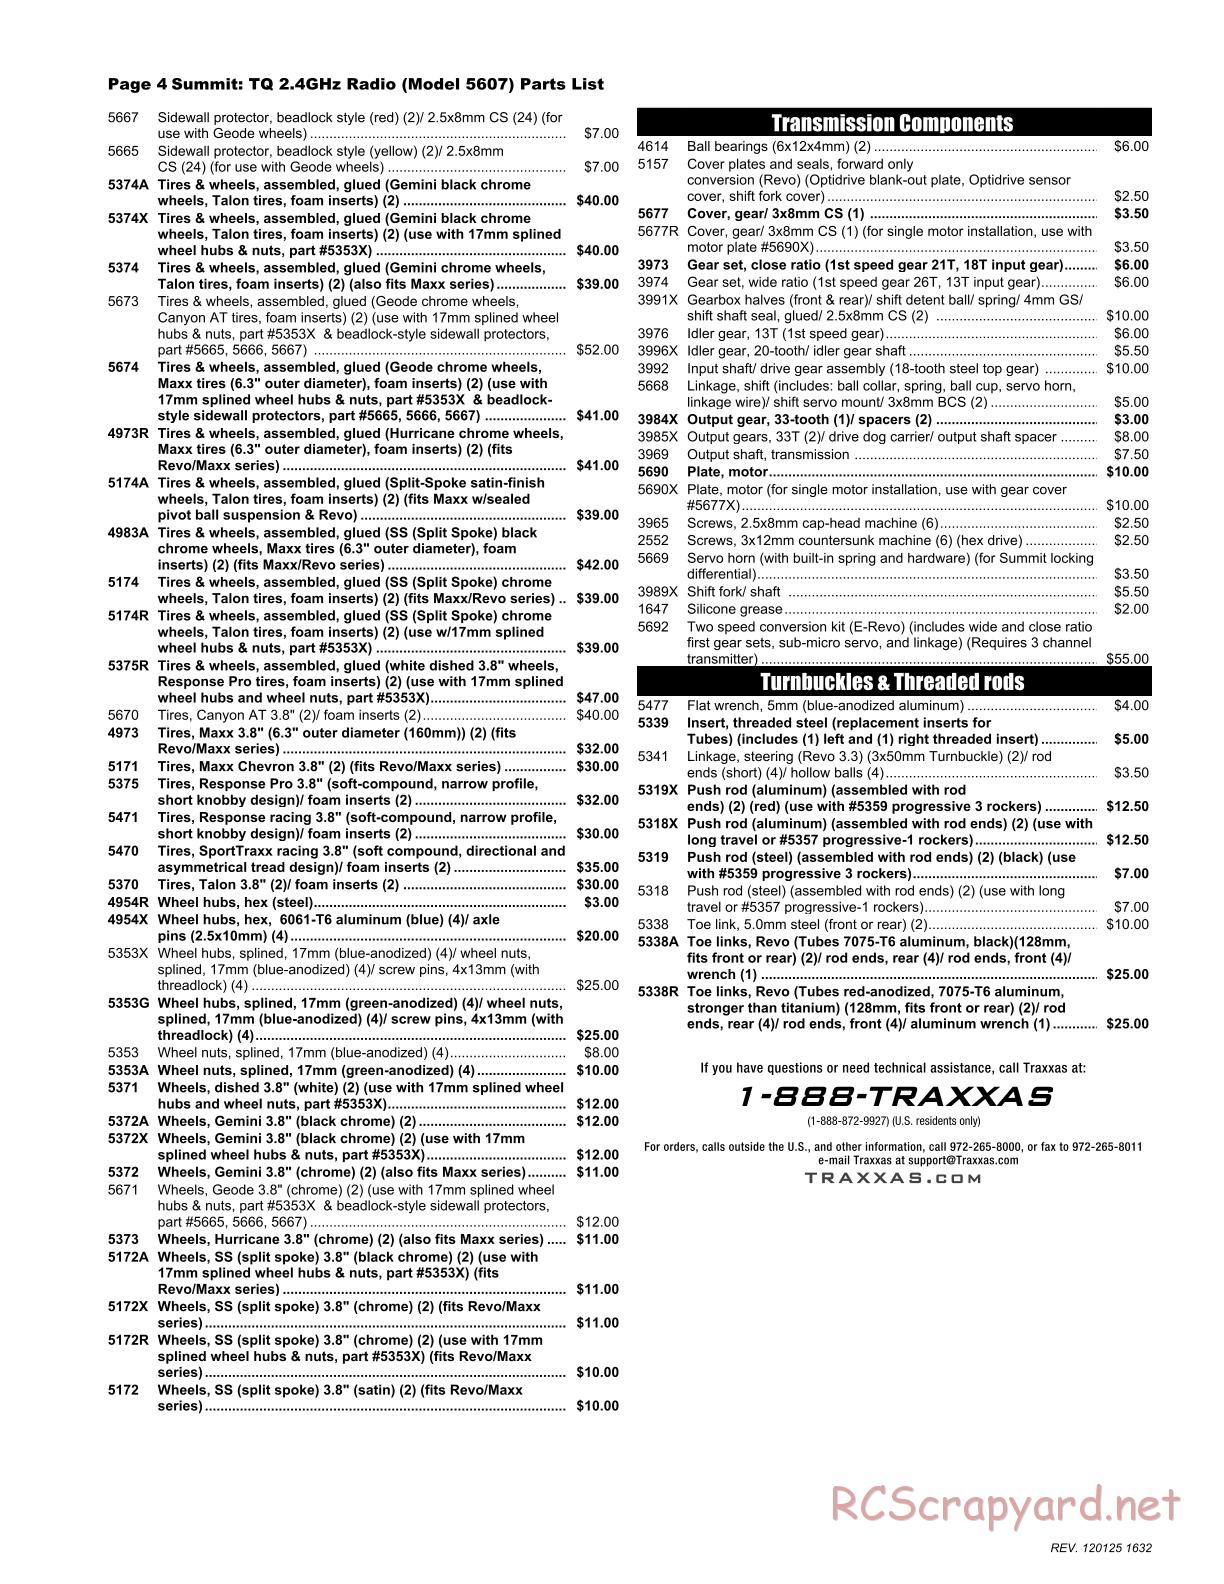 Traxxas - Summit - Parts List - Page 4